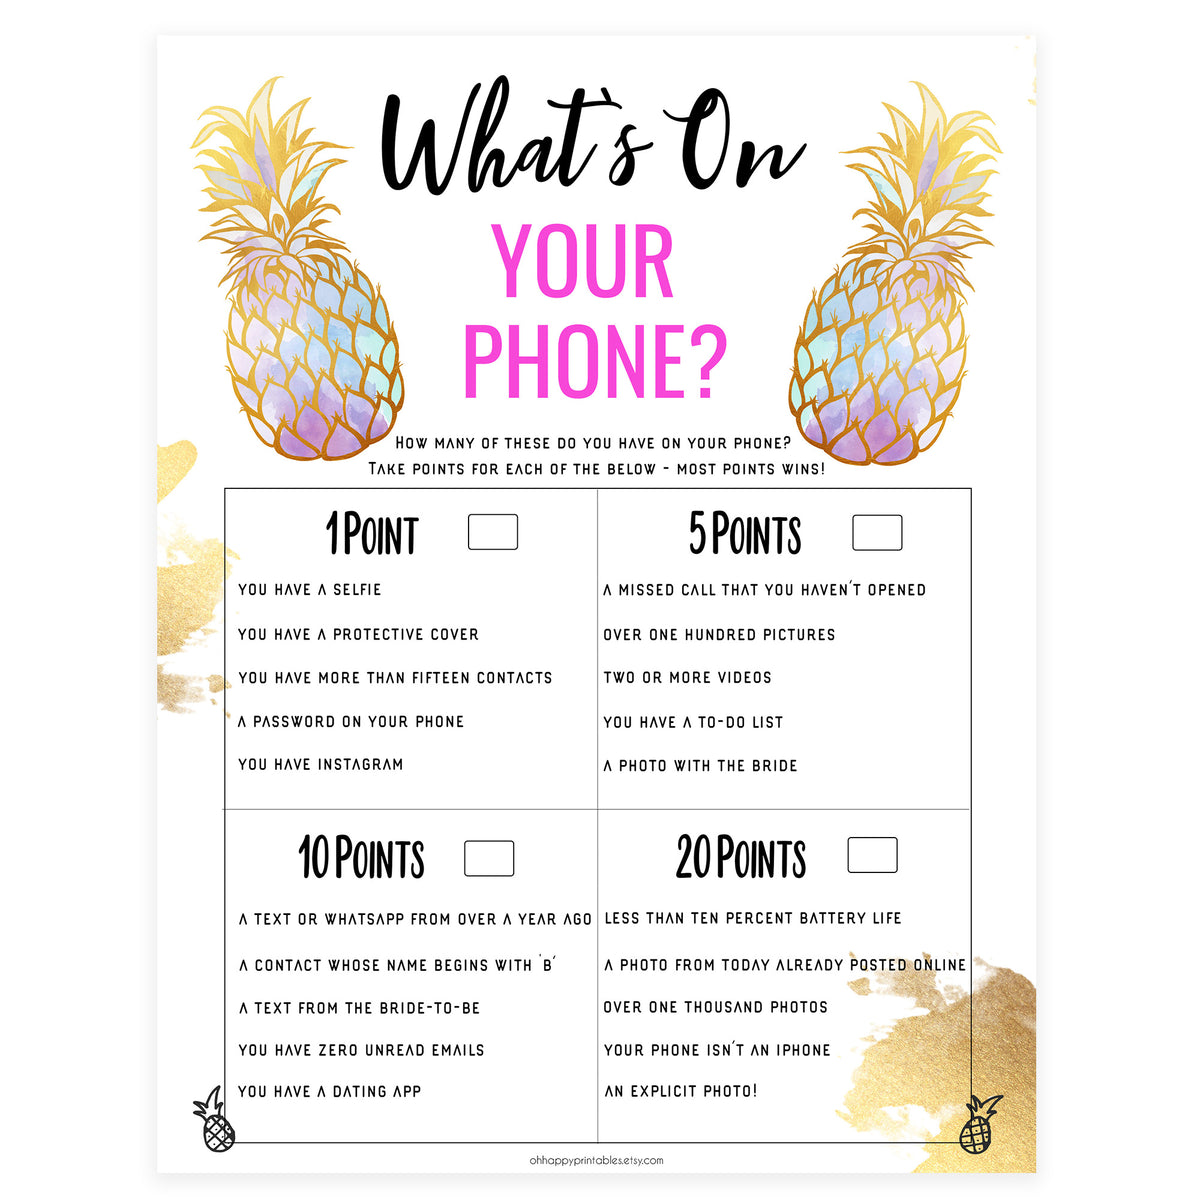 What's on Your Phone - Gold Pineapple